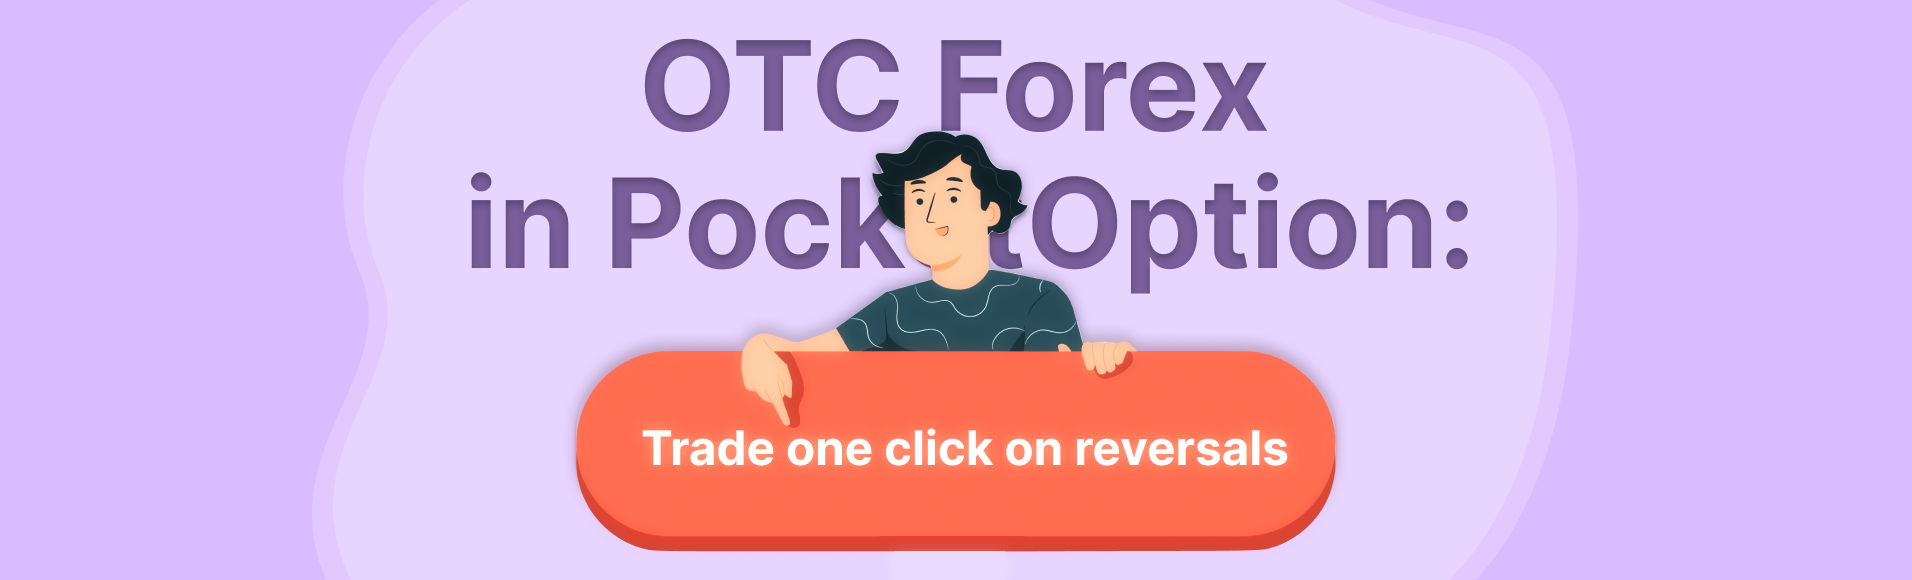 OTC Forex in PocketOption: trade one click on reversals